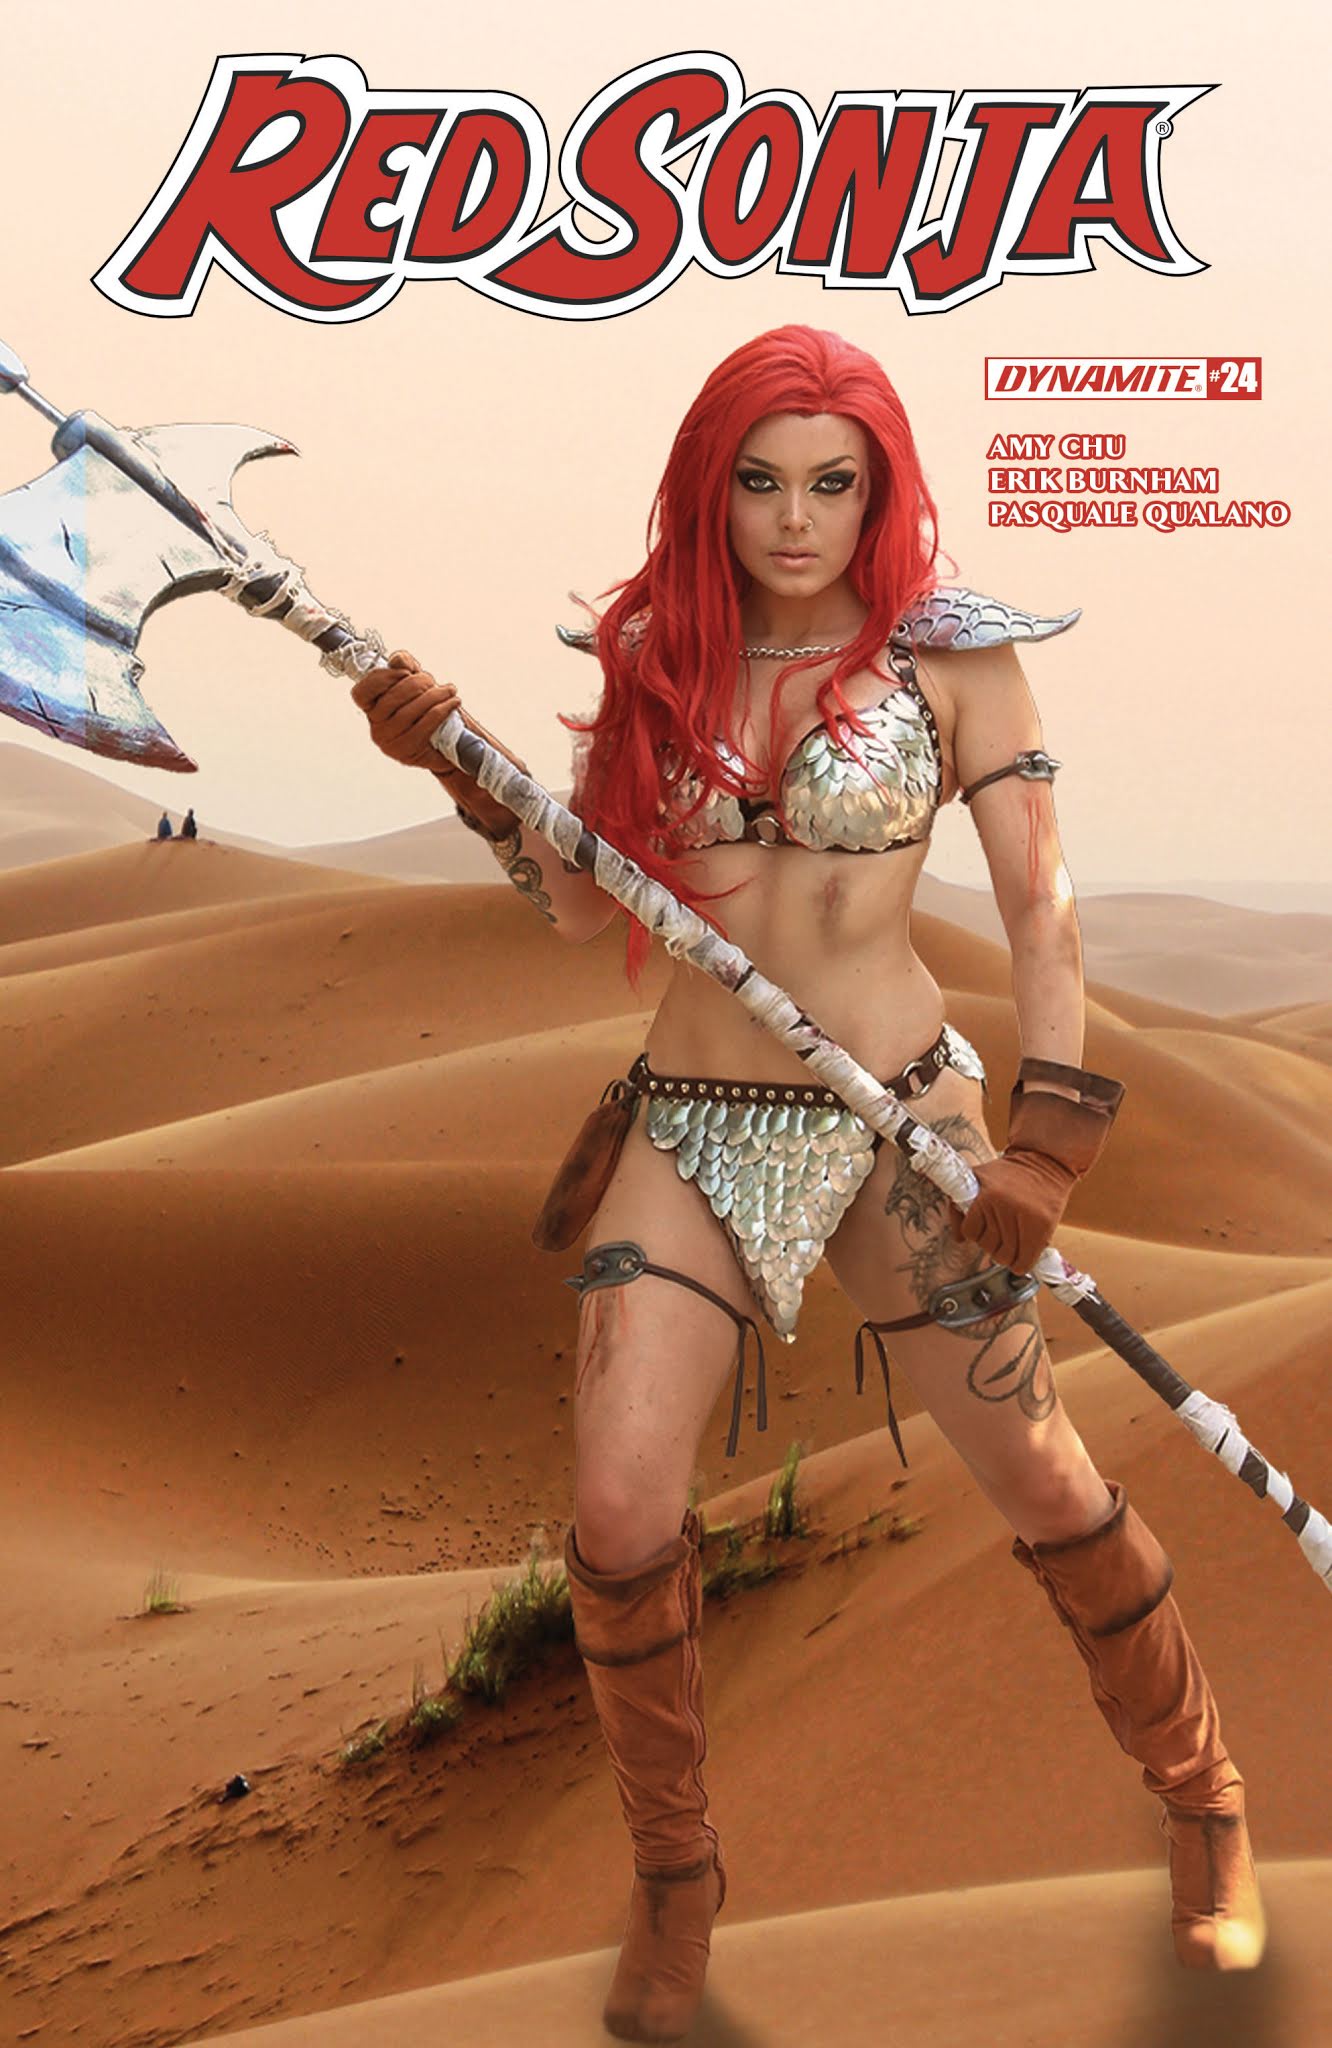 Read online Red Sonja Vol. 4 comic -  Issue #24 - 5